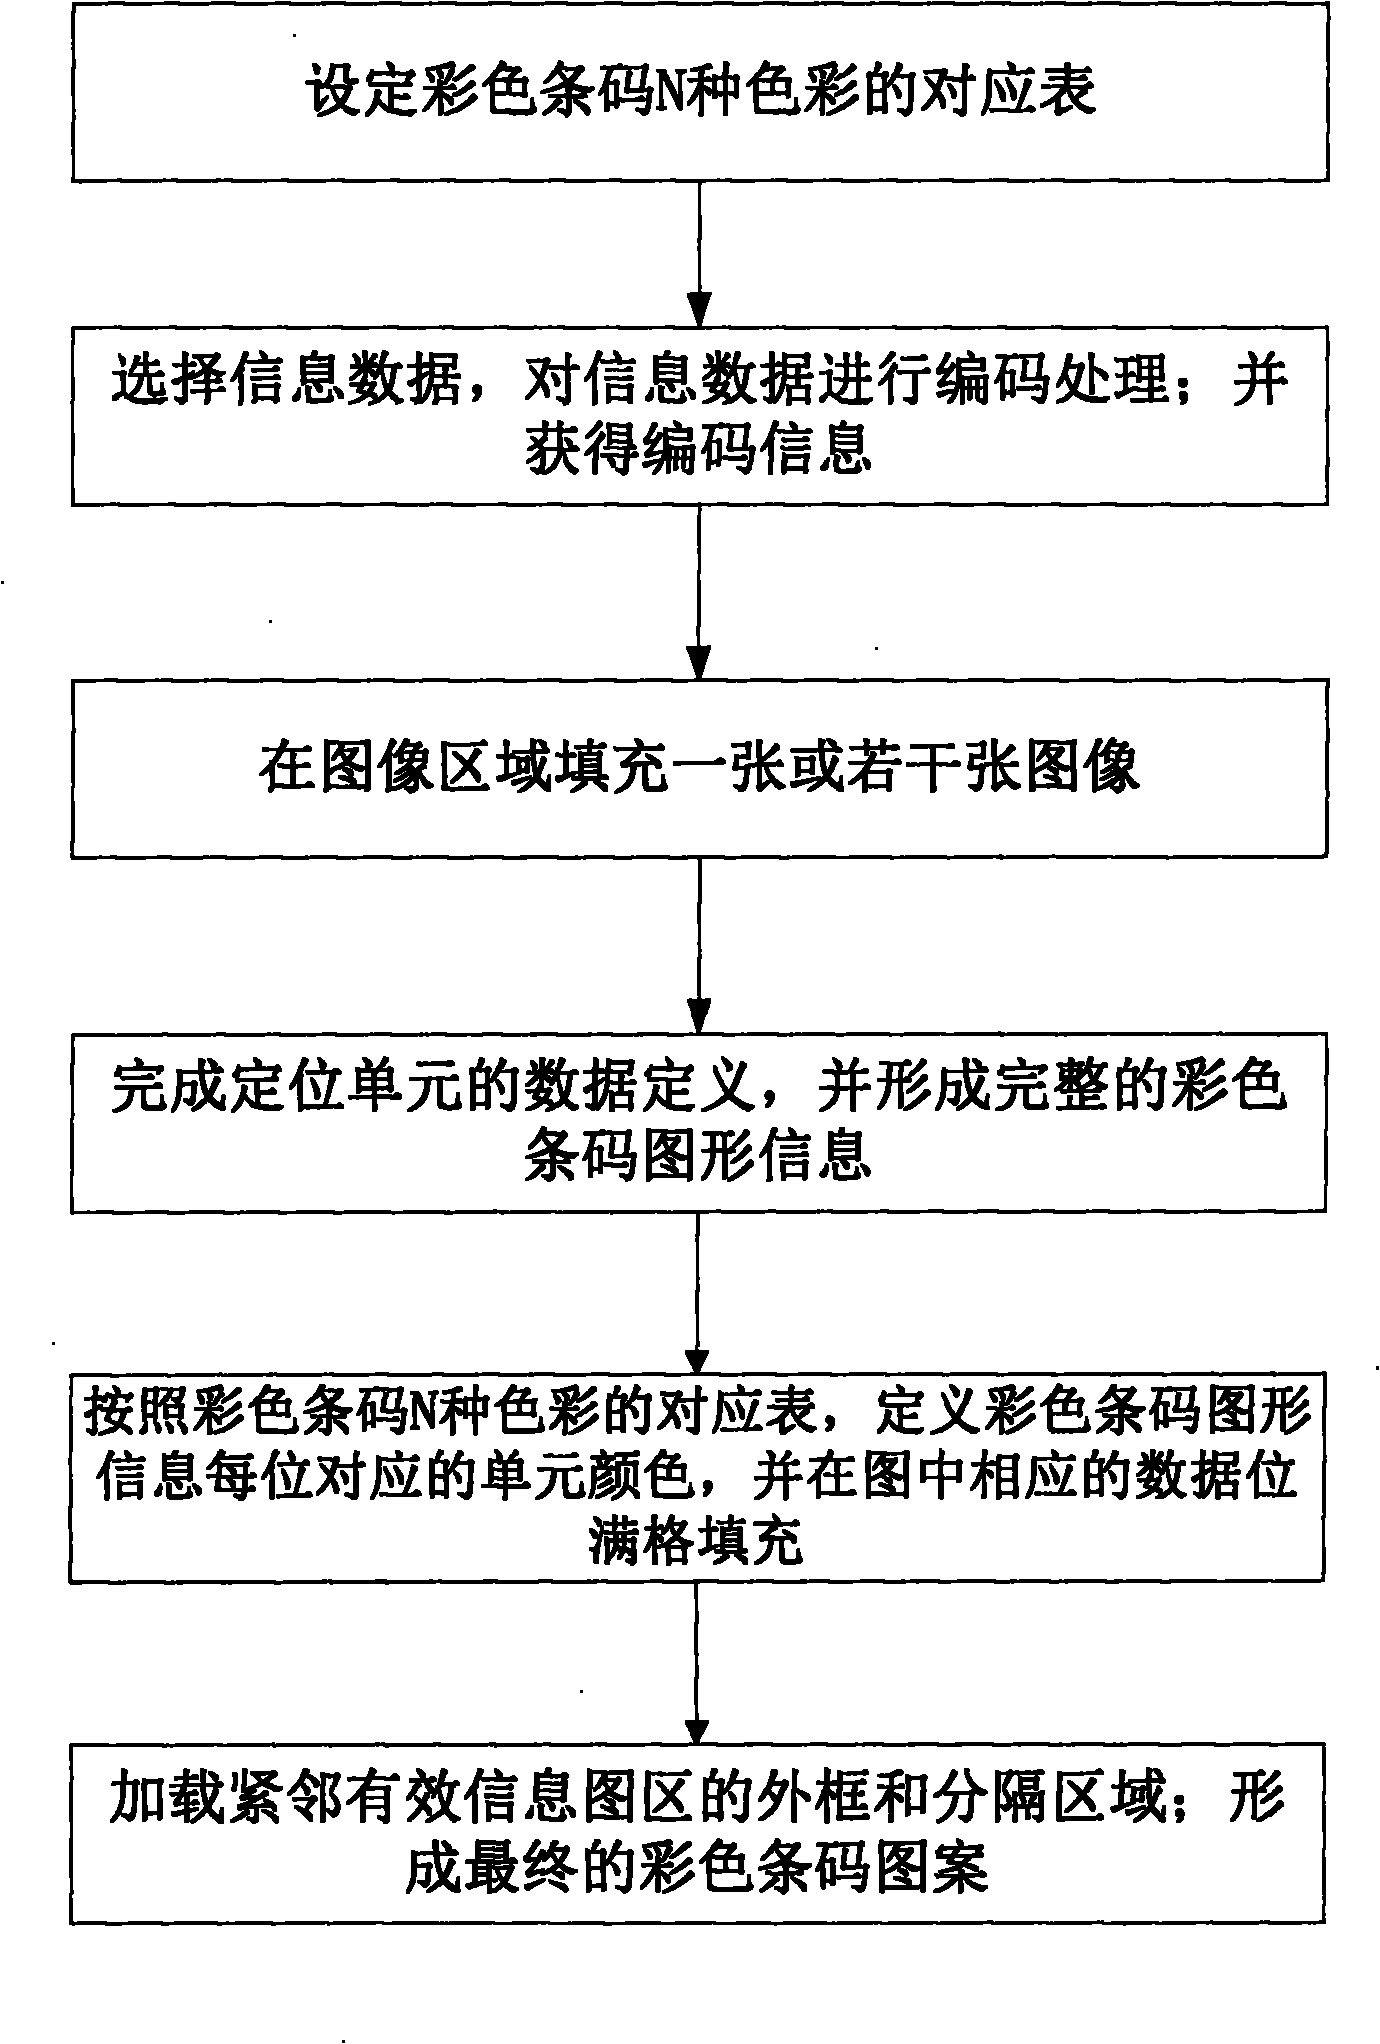 Method and system for generating color code as well as method and system for analyzing color code